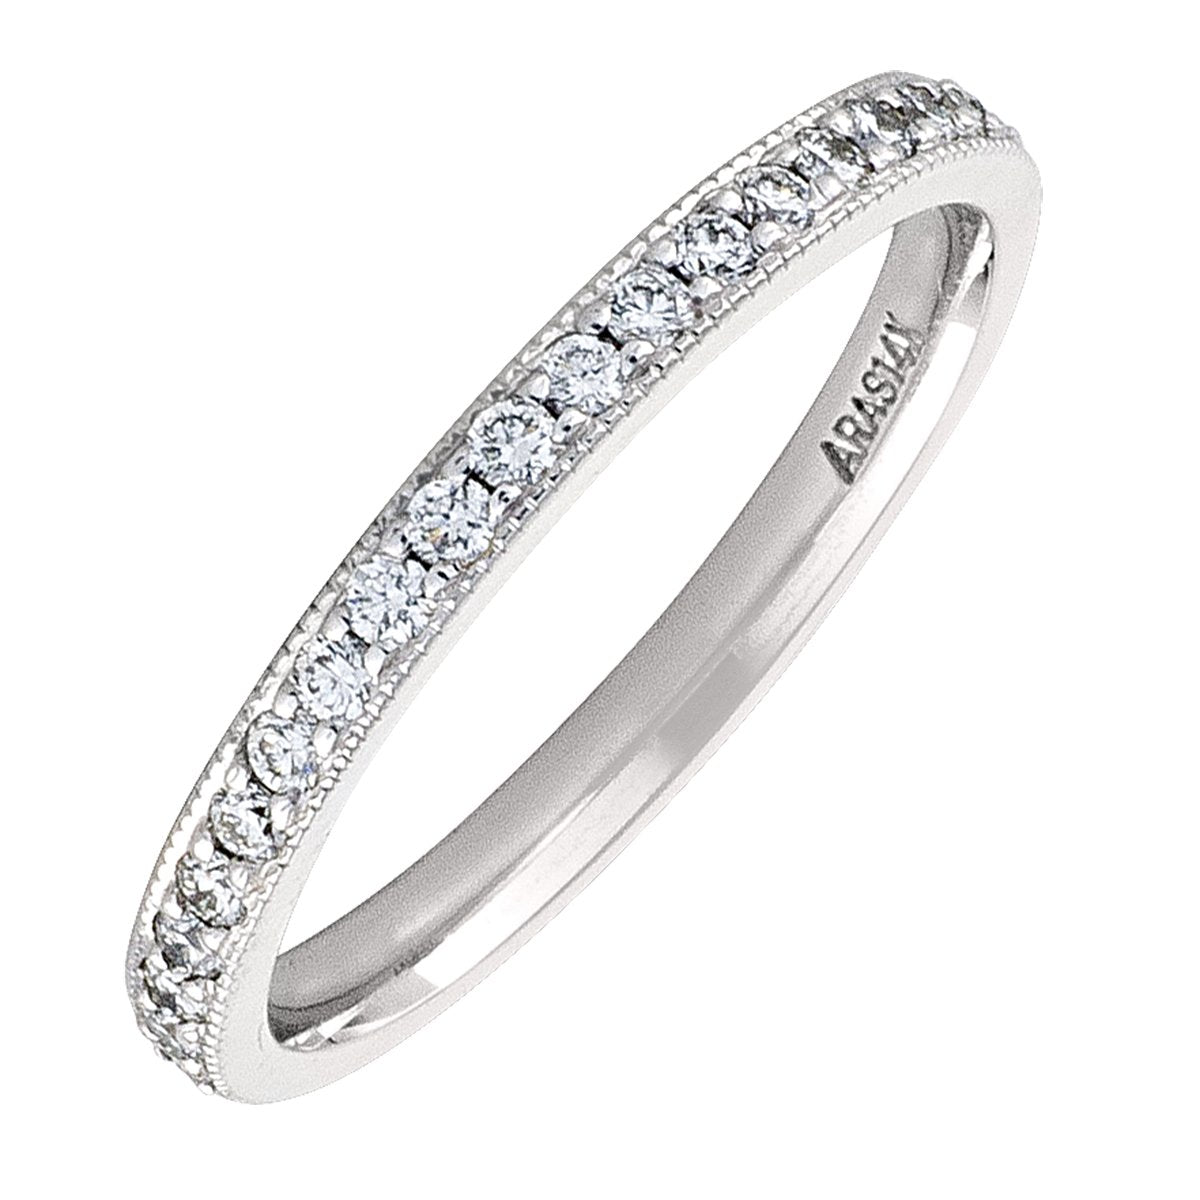 DIAMOND RINGS WHITE GOLD DIAMOND PAVE FULL ETERNITY BAND (AVAILABE IN VARIOUS STONE AND SIZE).